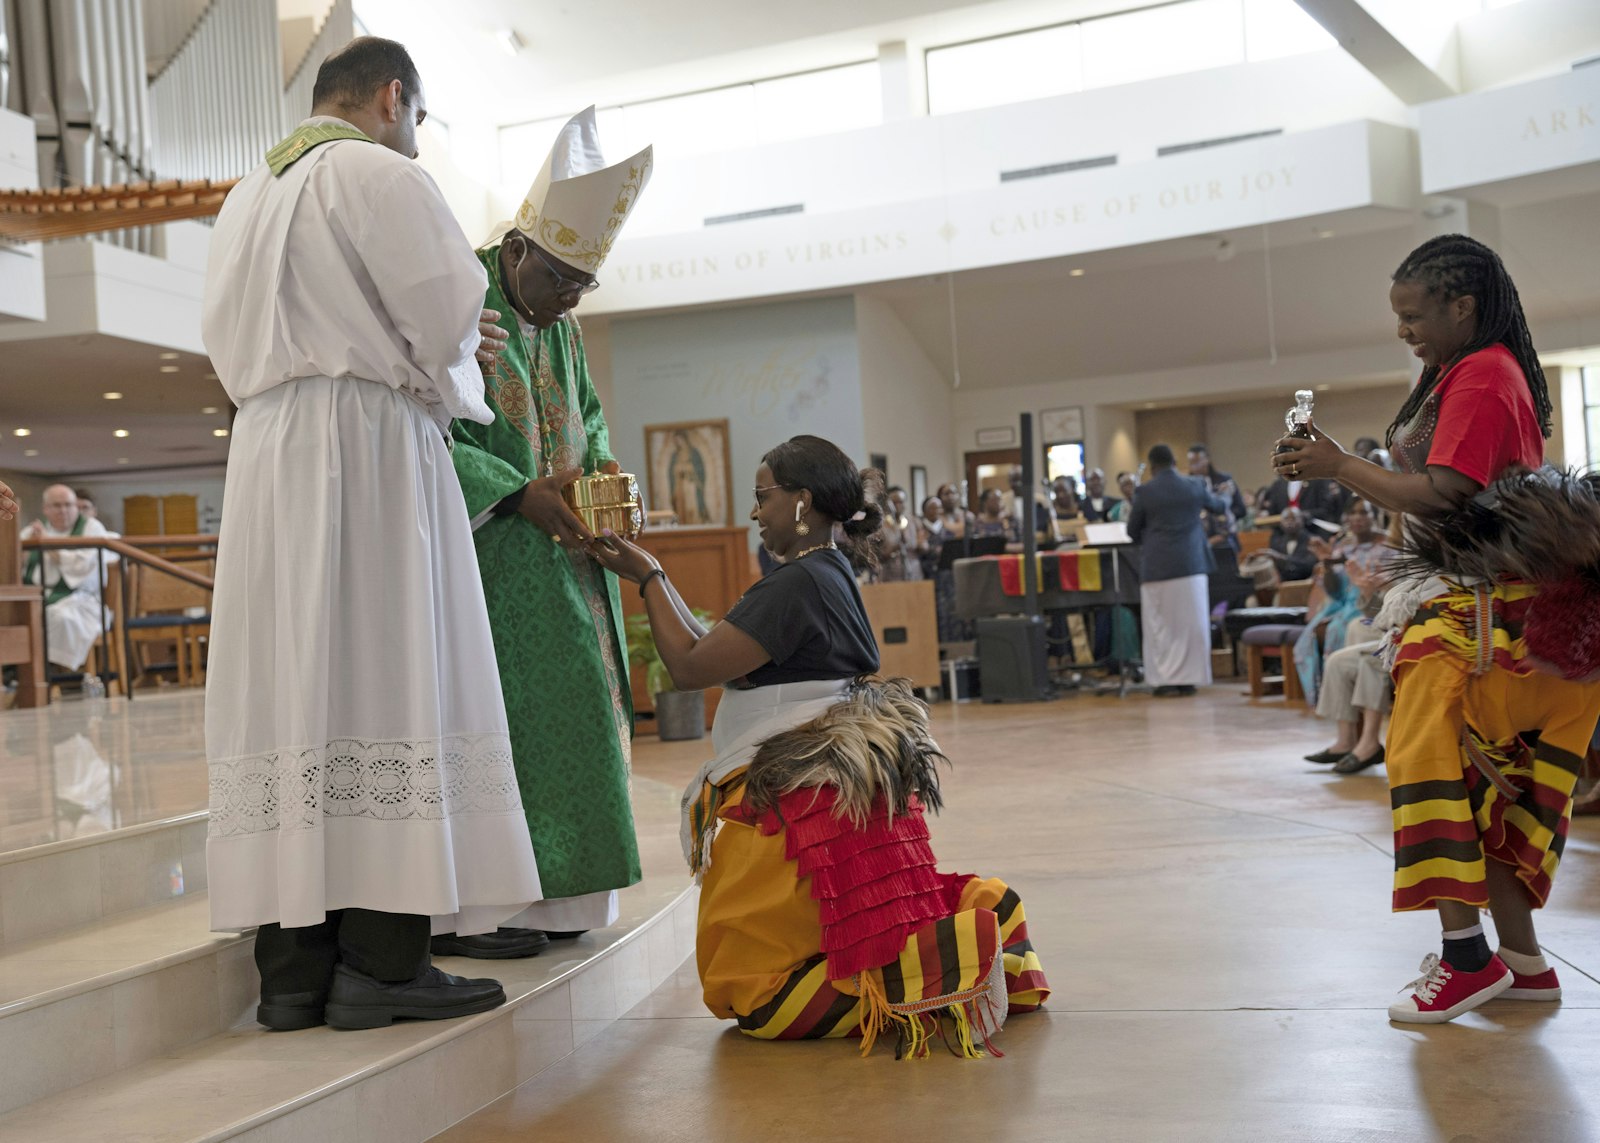 During Mass, the choir sang Ugandan hymns and liturgical dancers (shown in the photo) brought up the gifts.